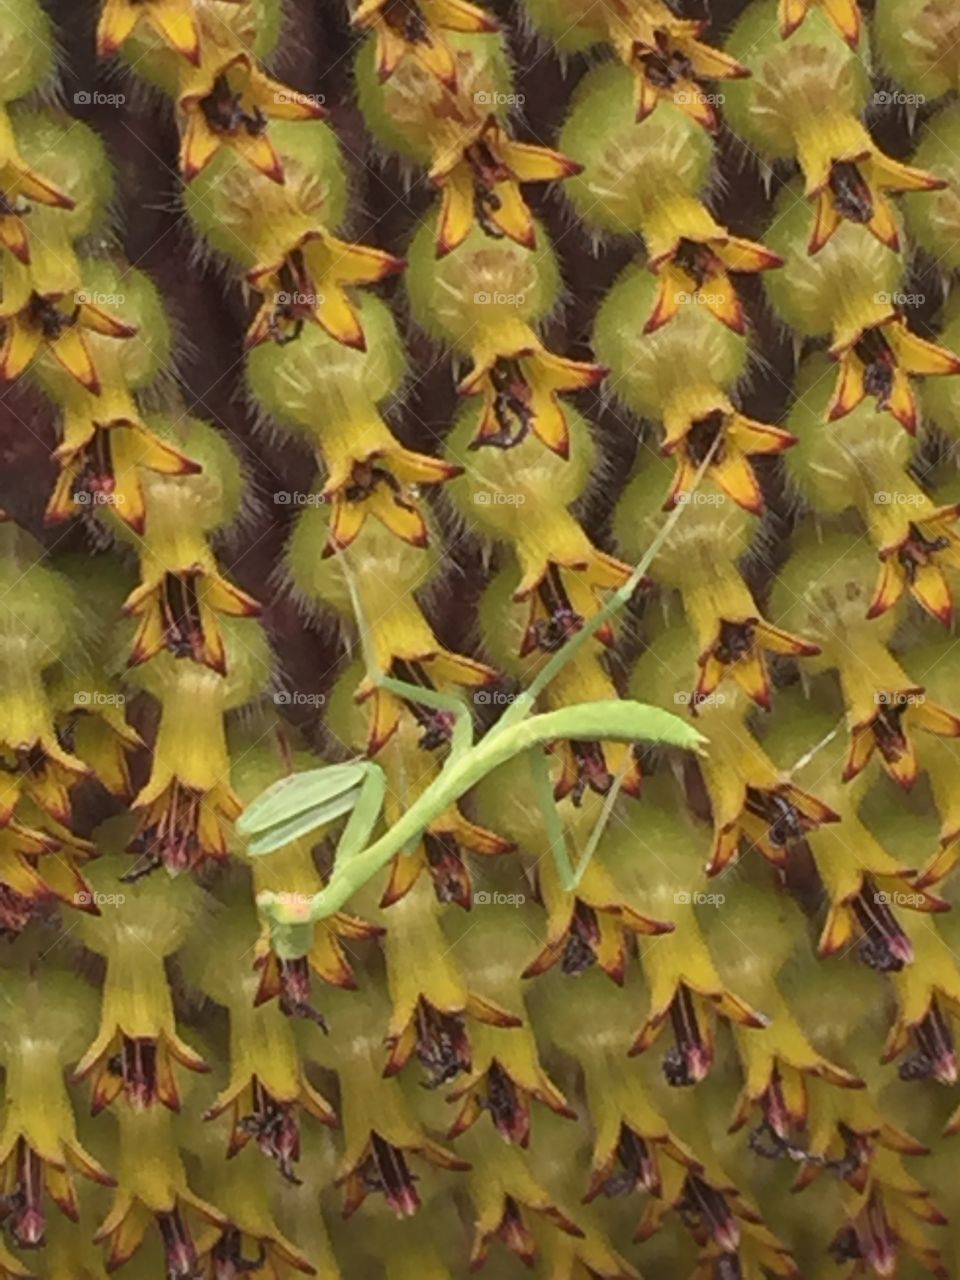 Preying mantis on a sunflower 